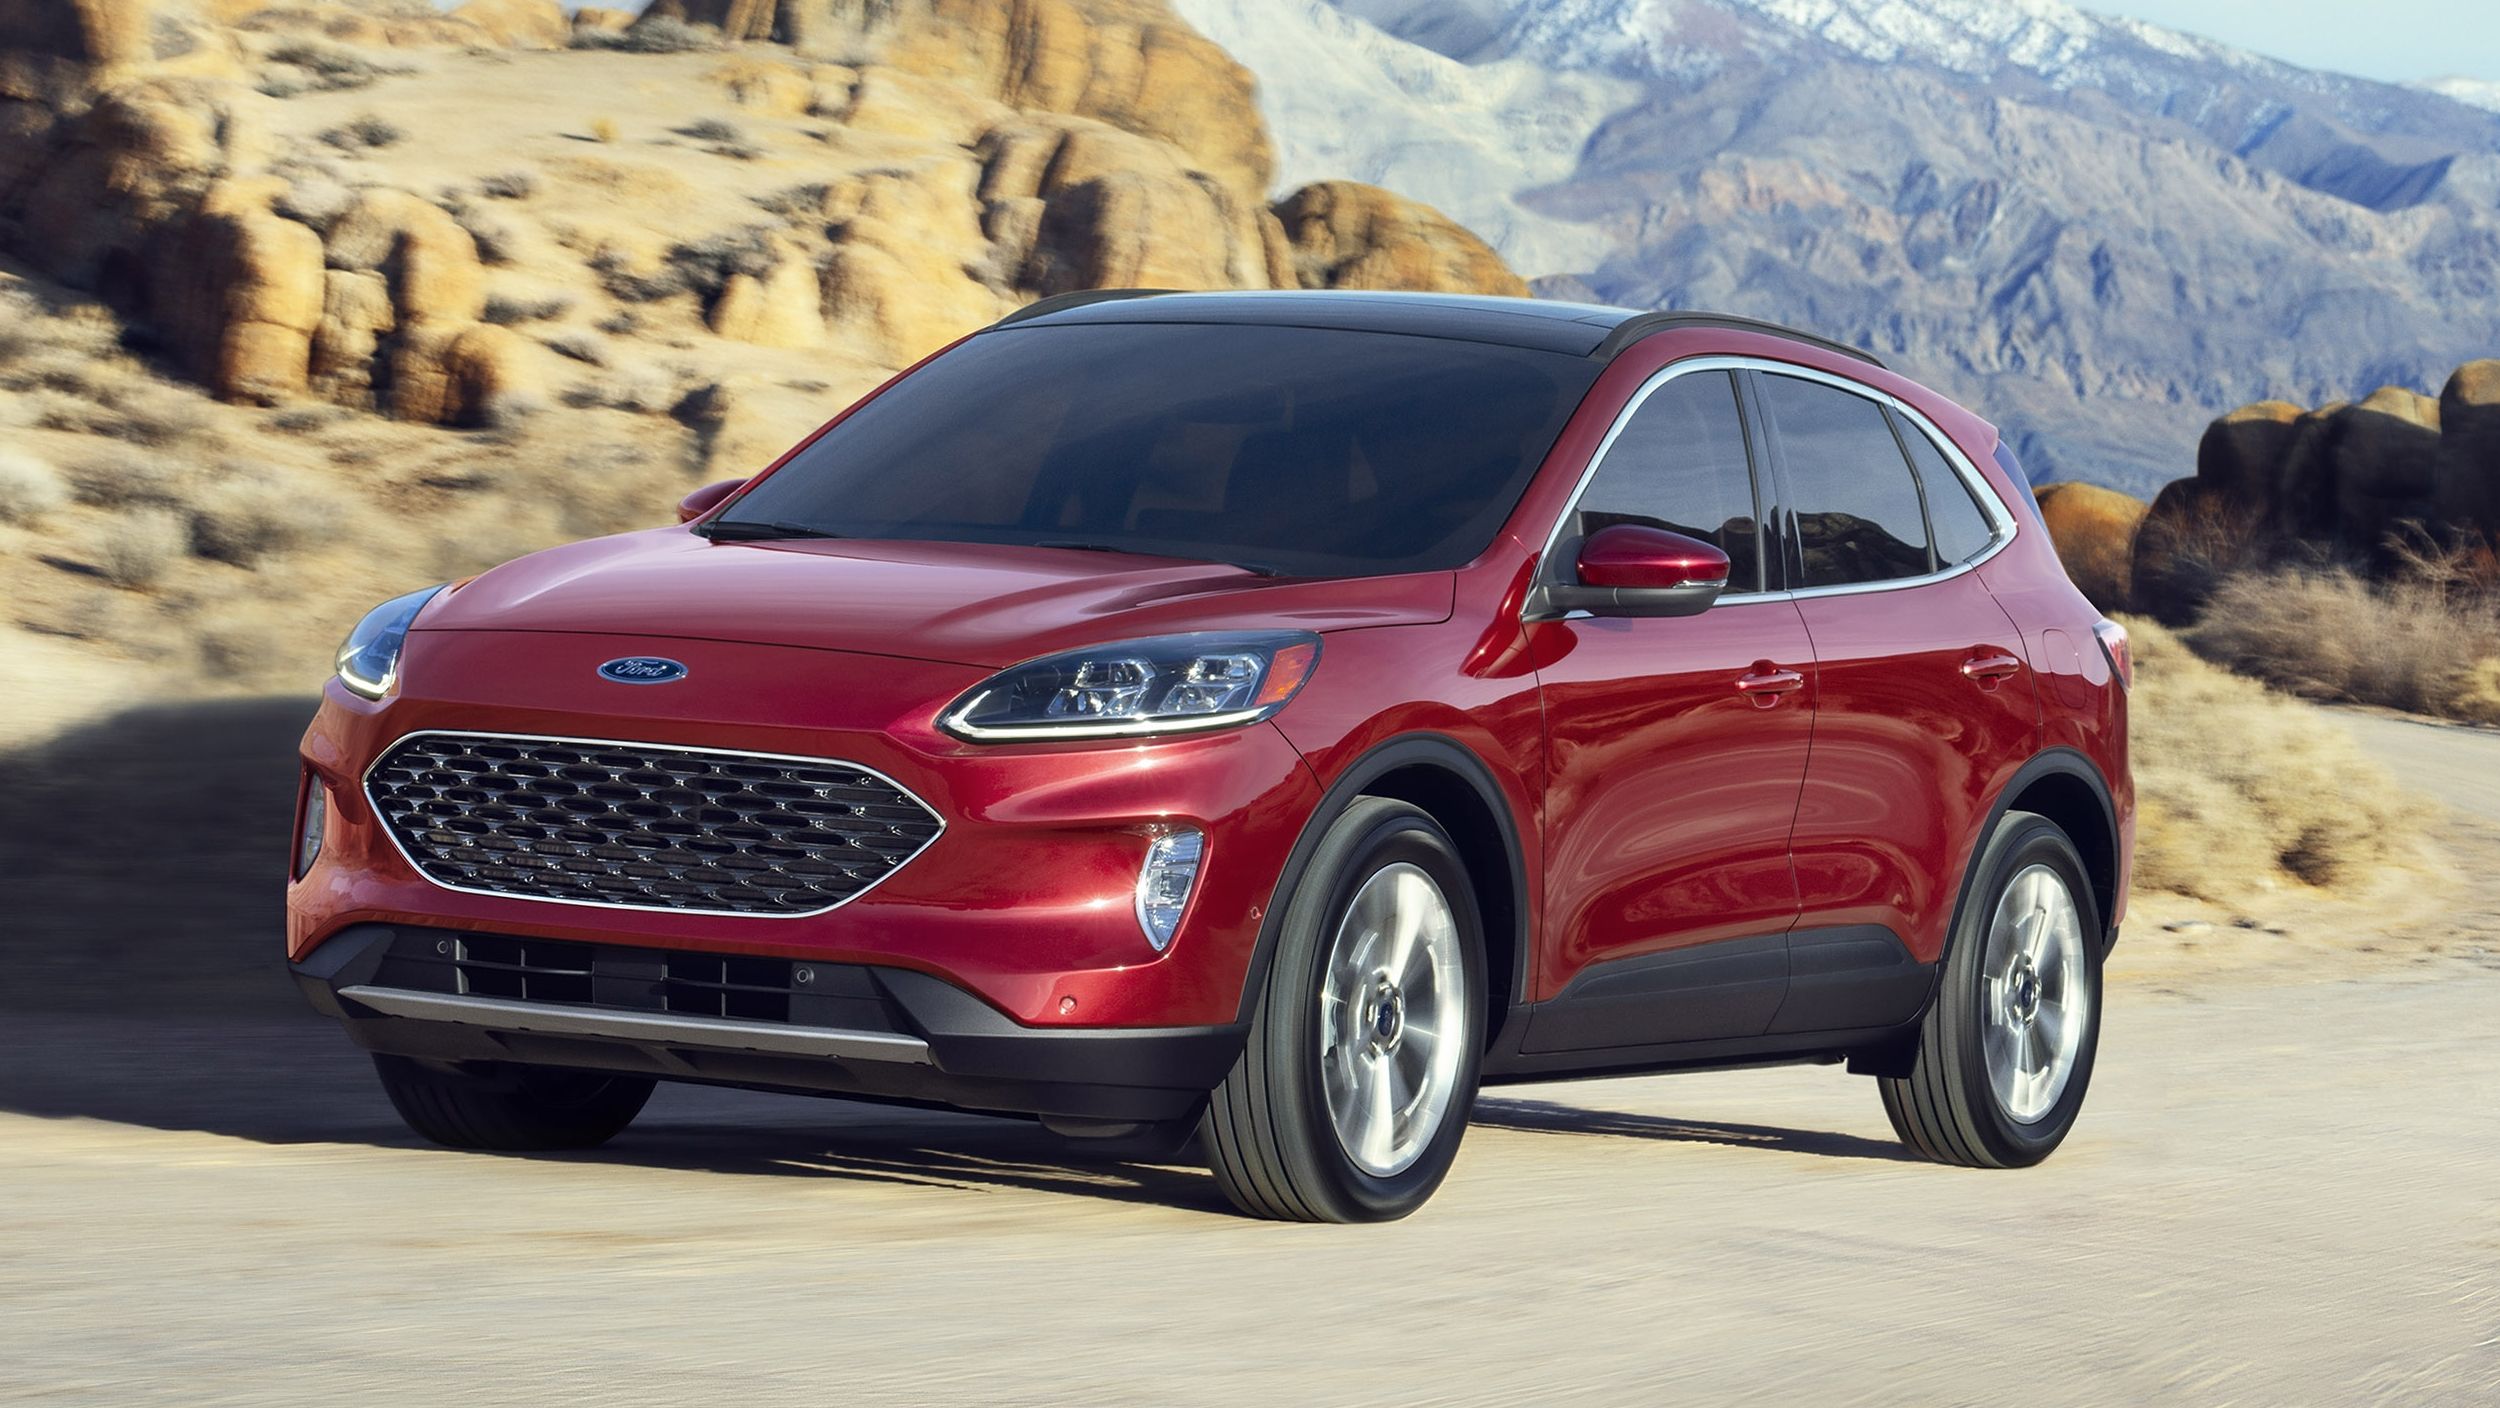 2020 The 2020 Ford Escape Is Smarter But it Looks Like a Focus or Fiesta With an Upside-Down Grille